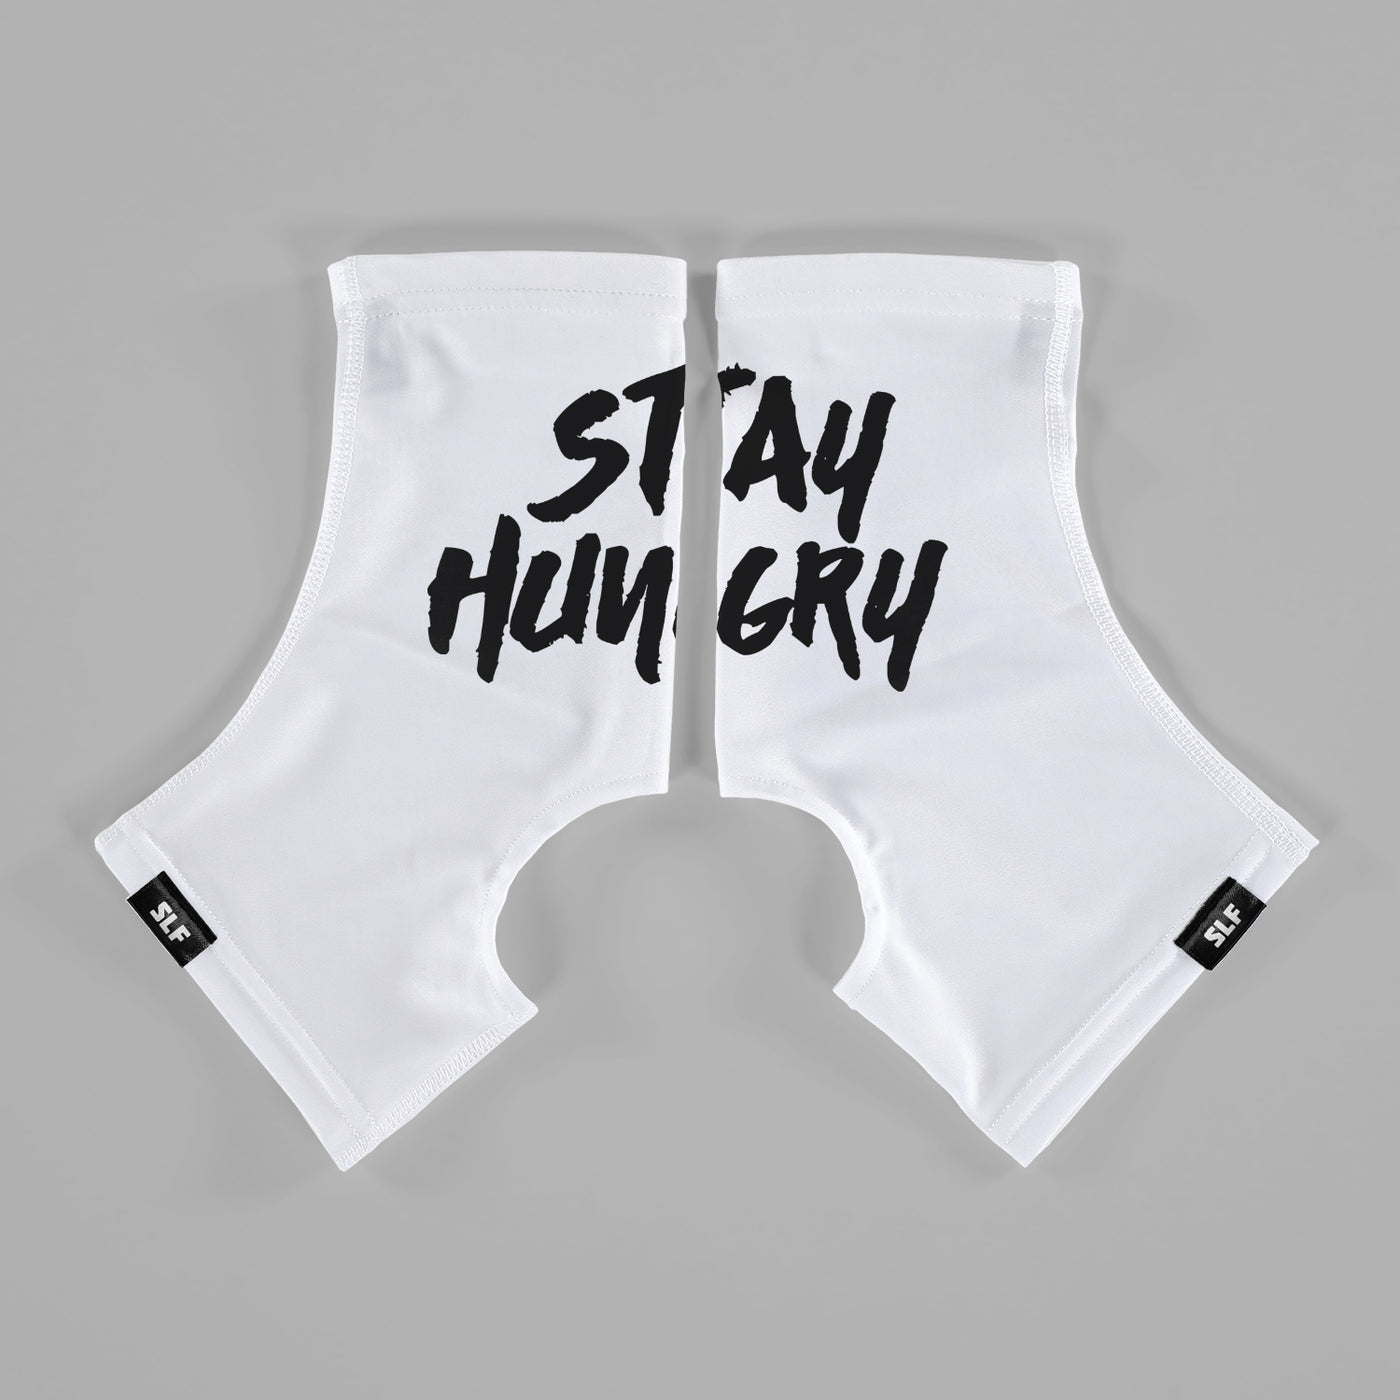 Stay Hungry White Spats / Cleat Covers